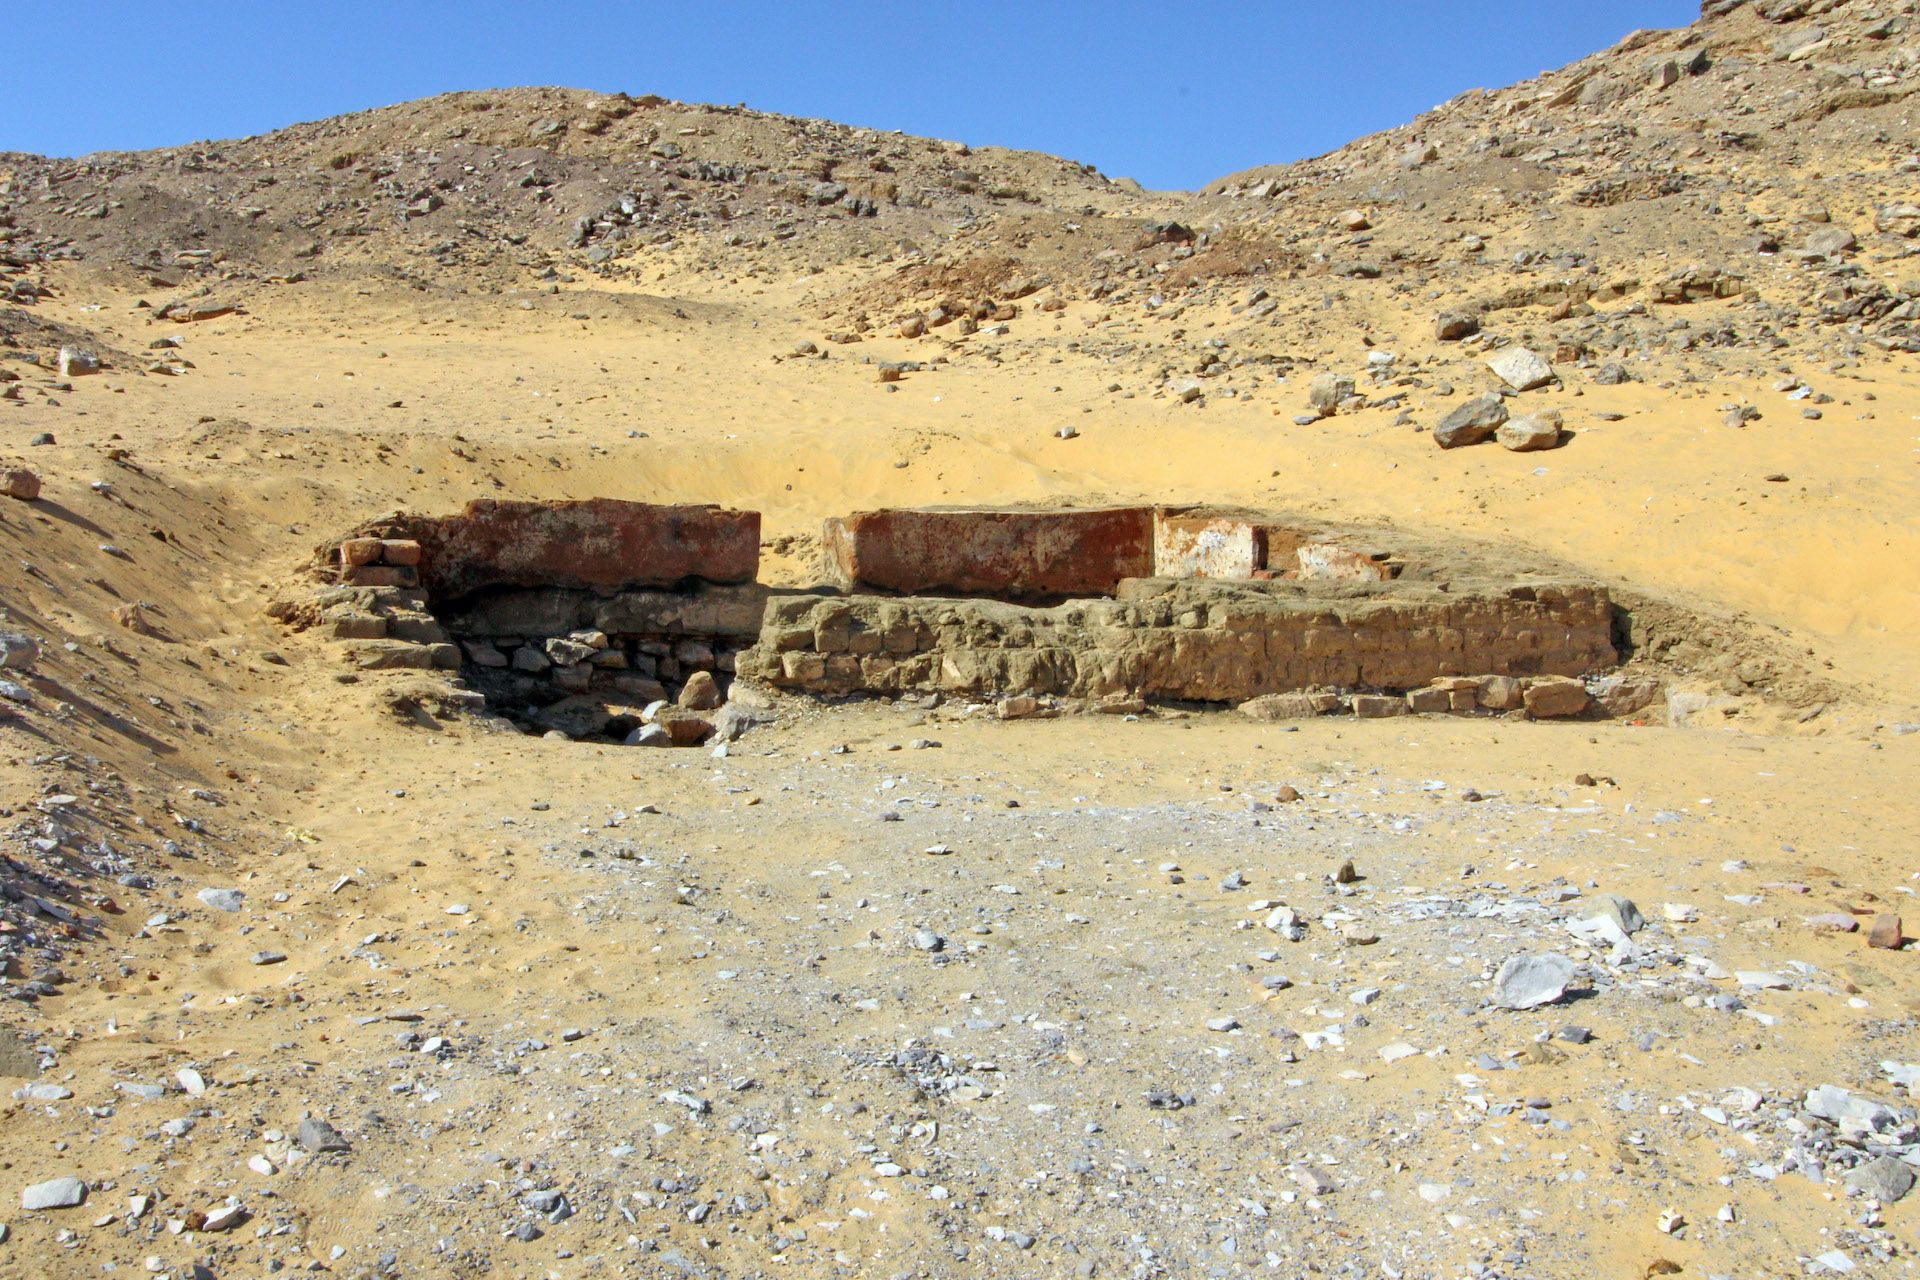 The newly discovered rectangular structure containing the tomb.